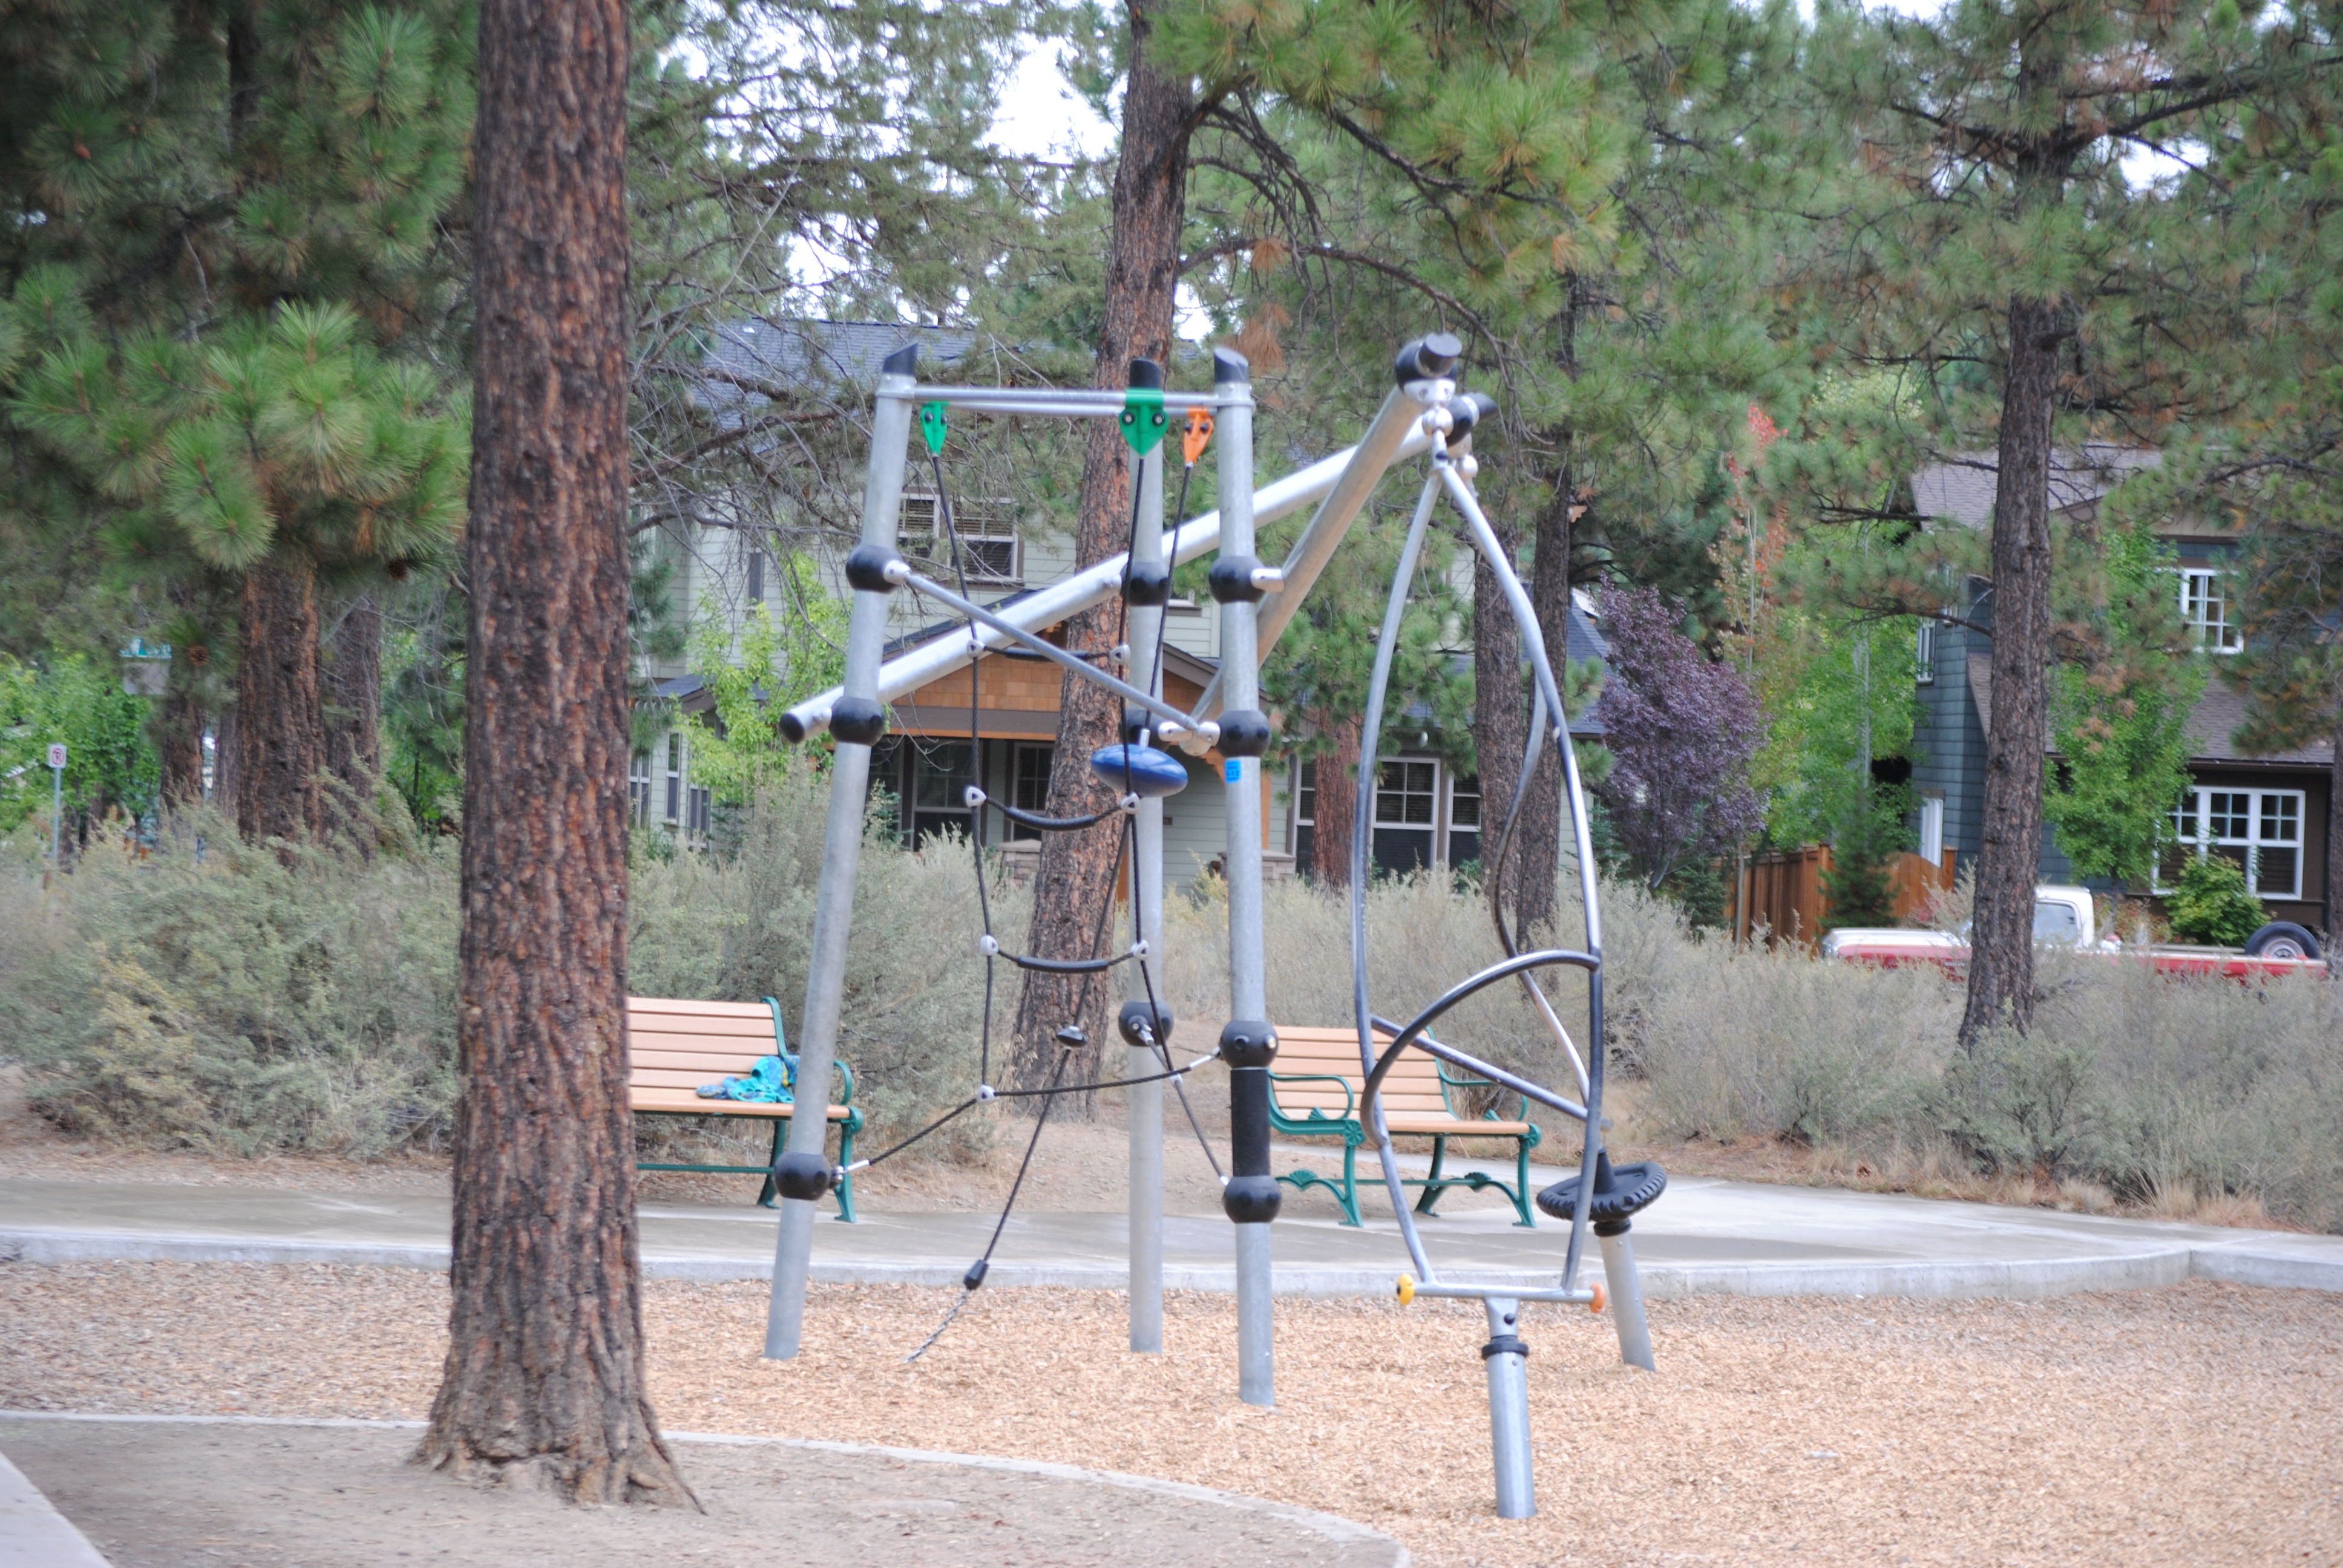 a play structure at compass park